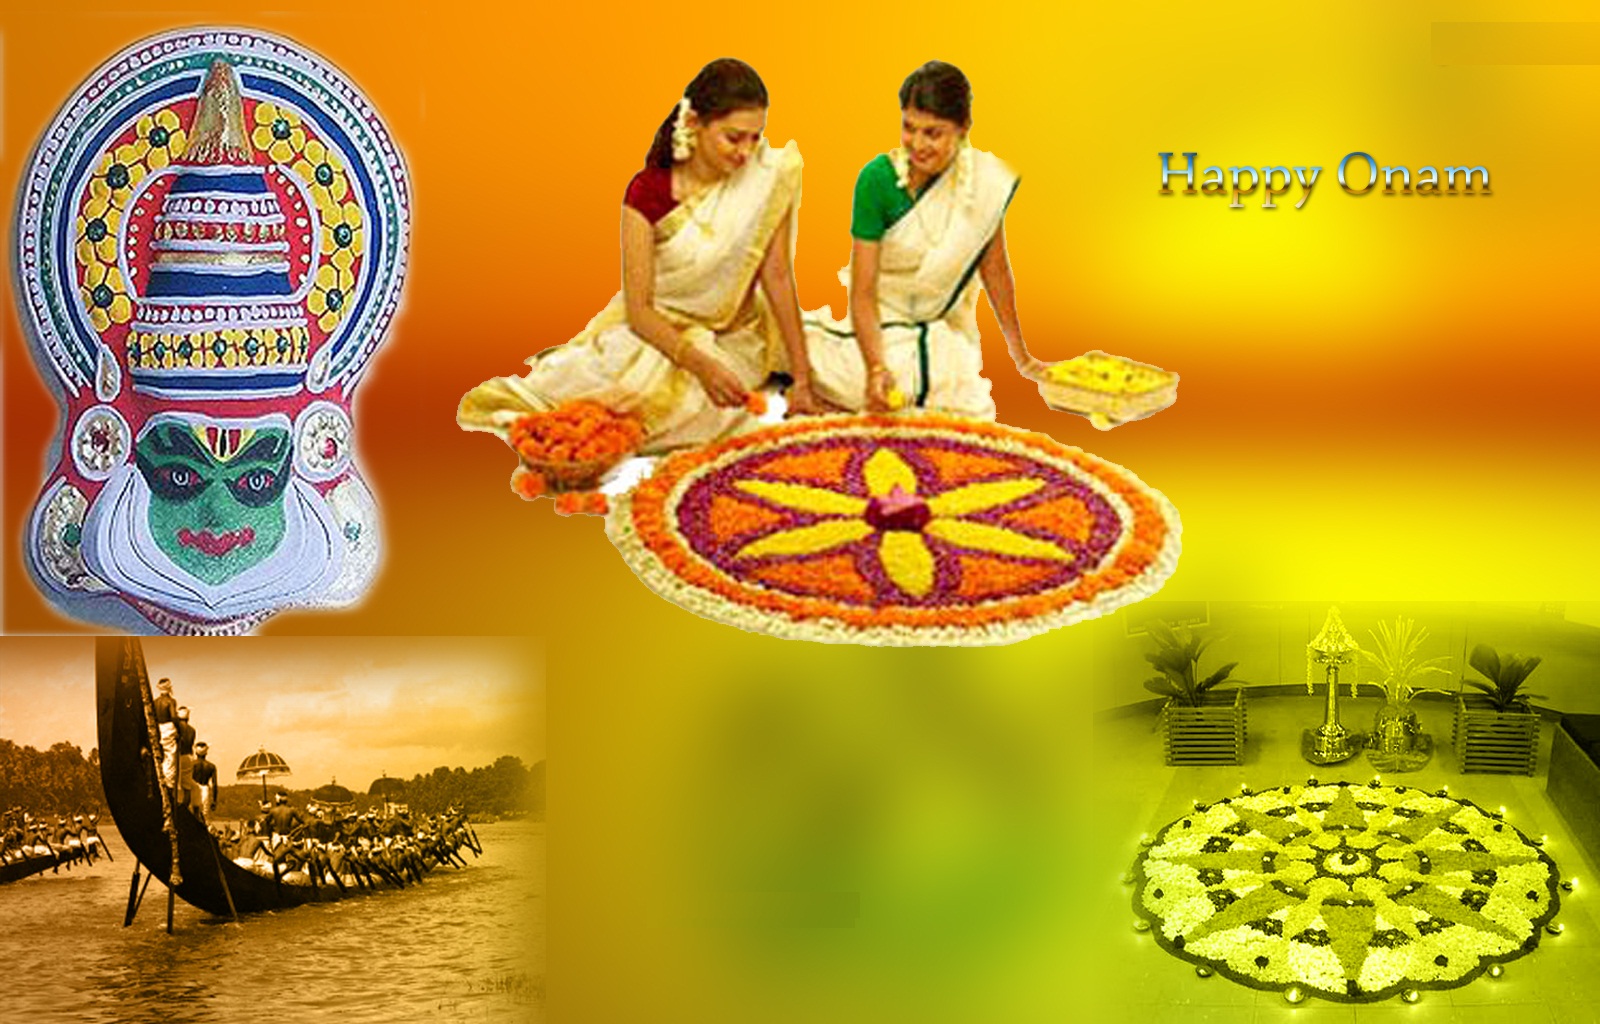 Happy Onam 2015 Festival Images Pictures Wallpapers Photos ...